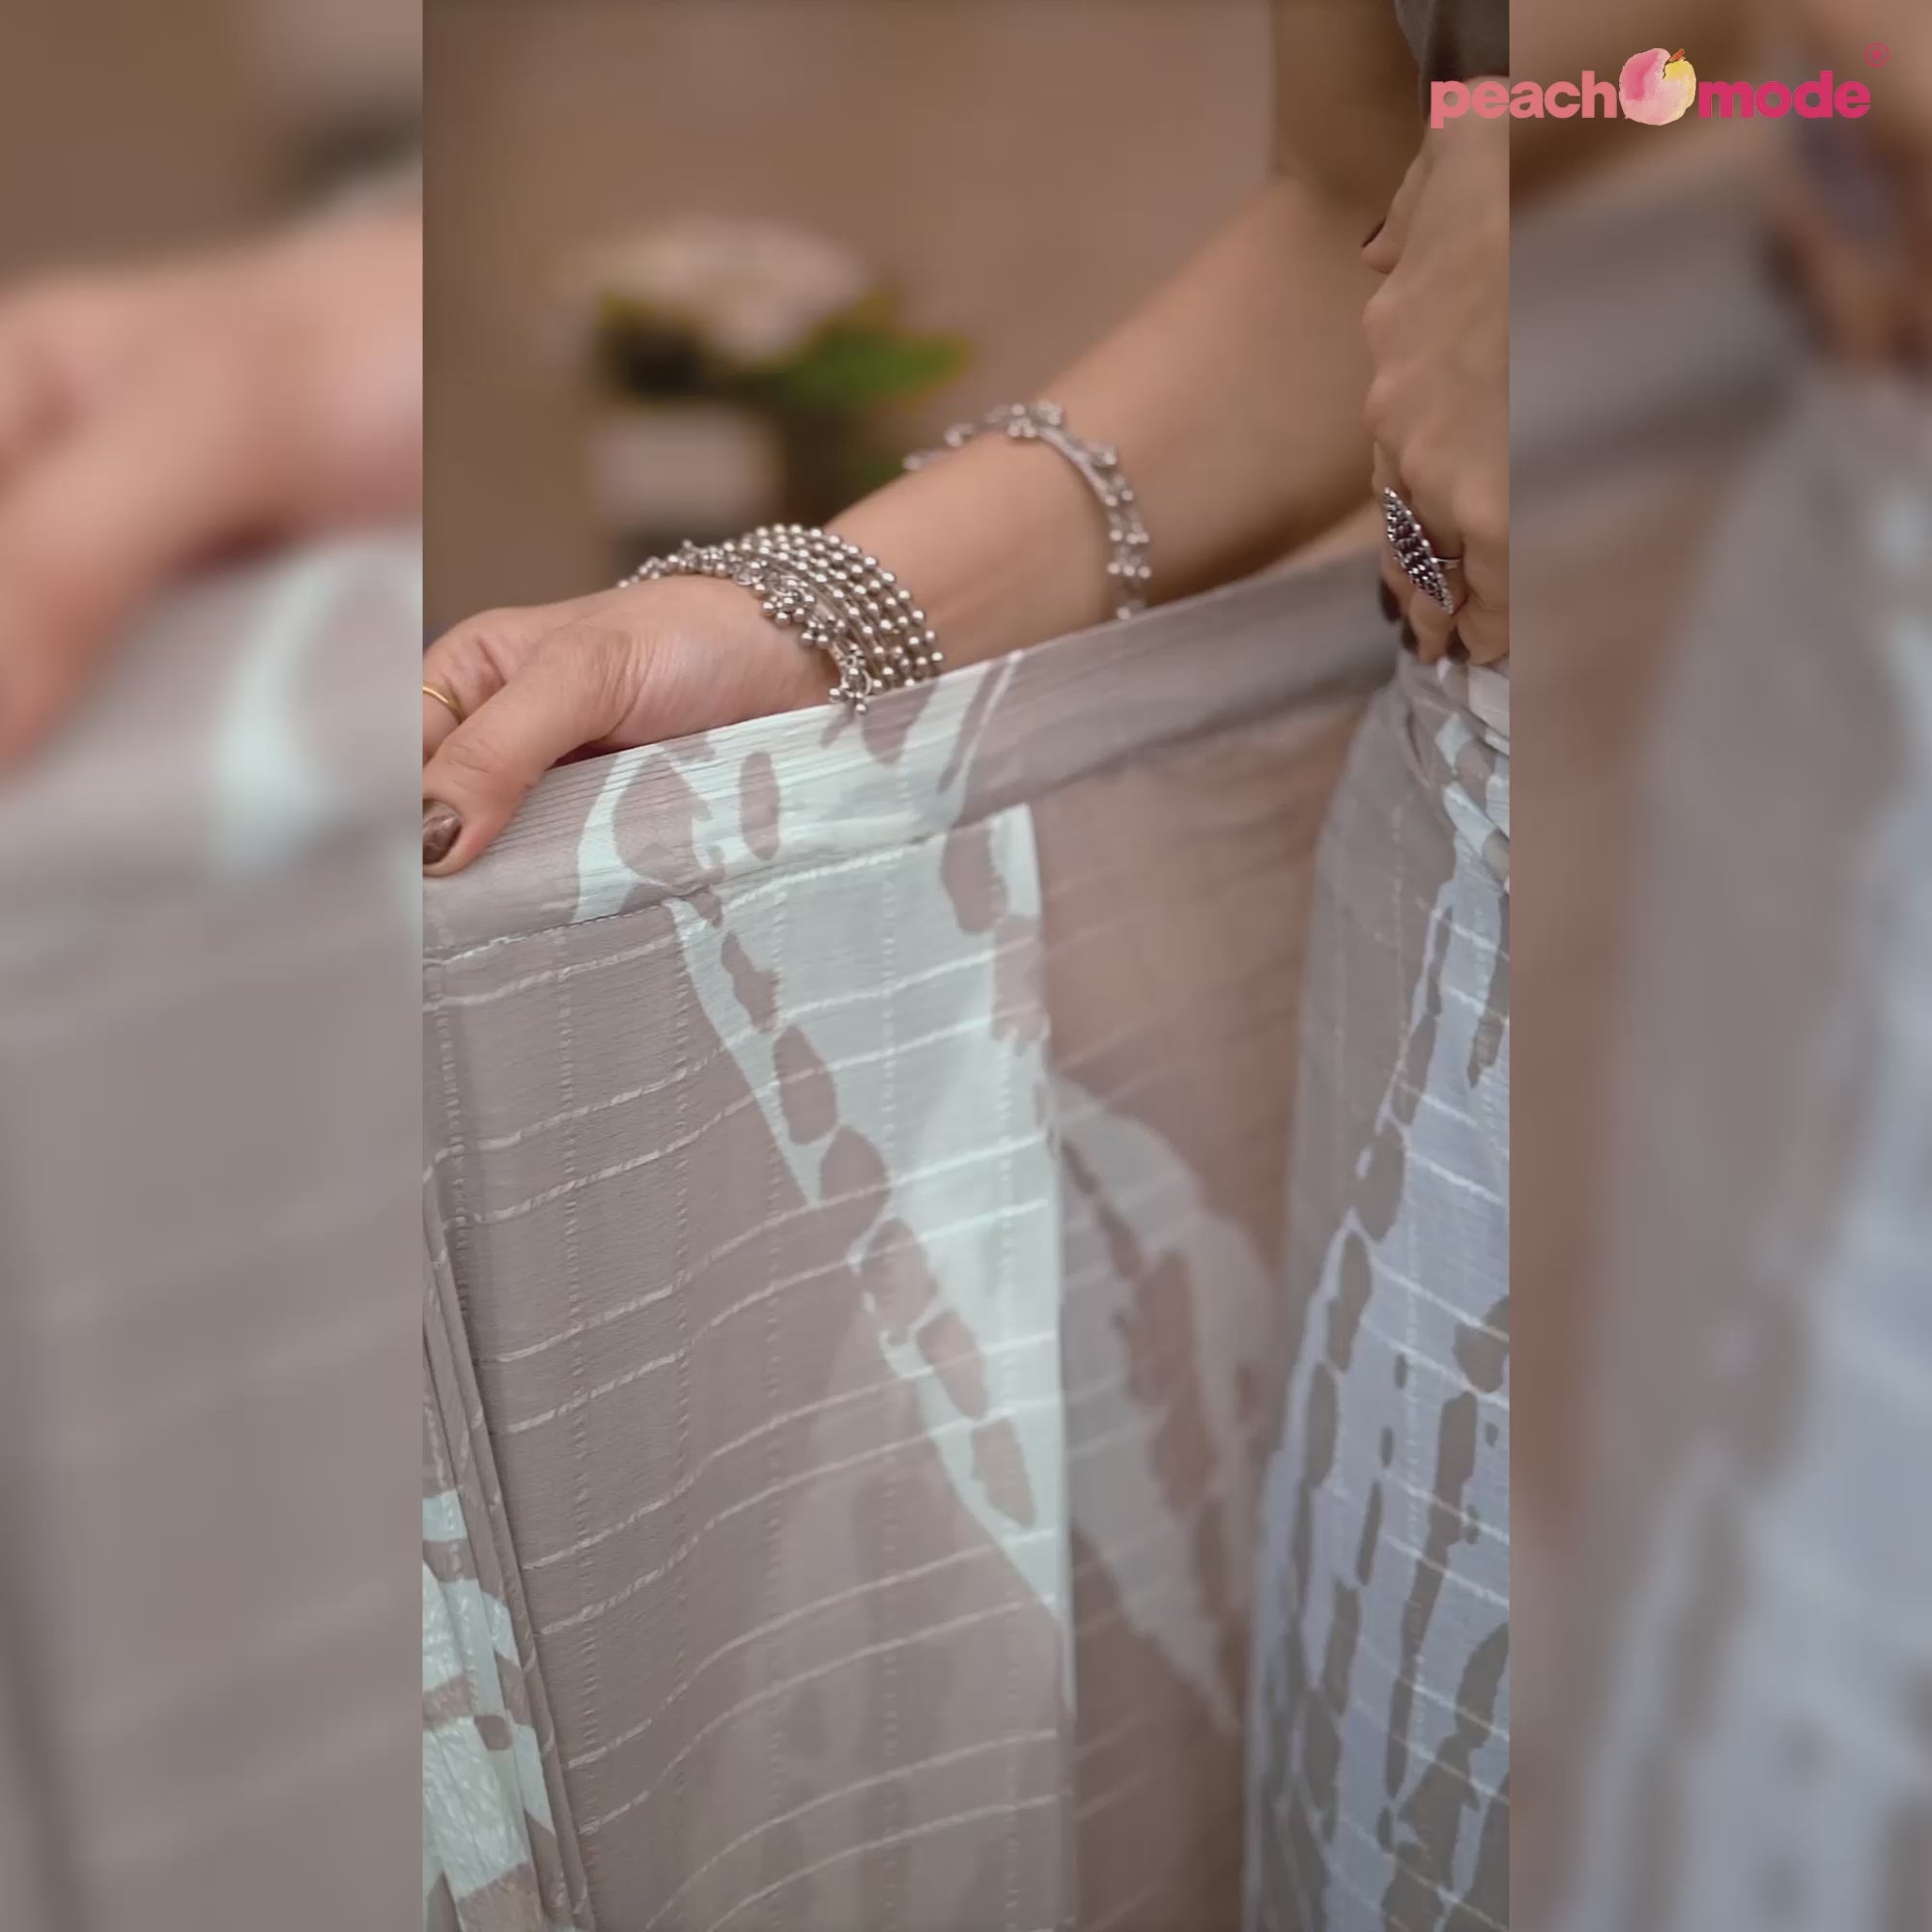 Light Grey Woven With Printed Ready To Wear Georgette Saree